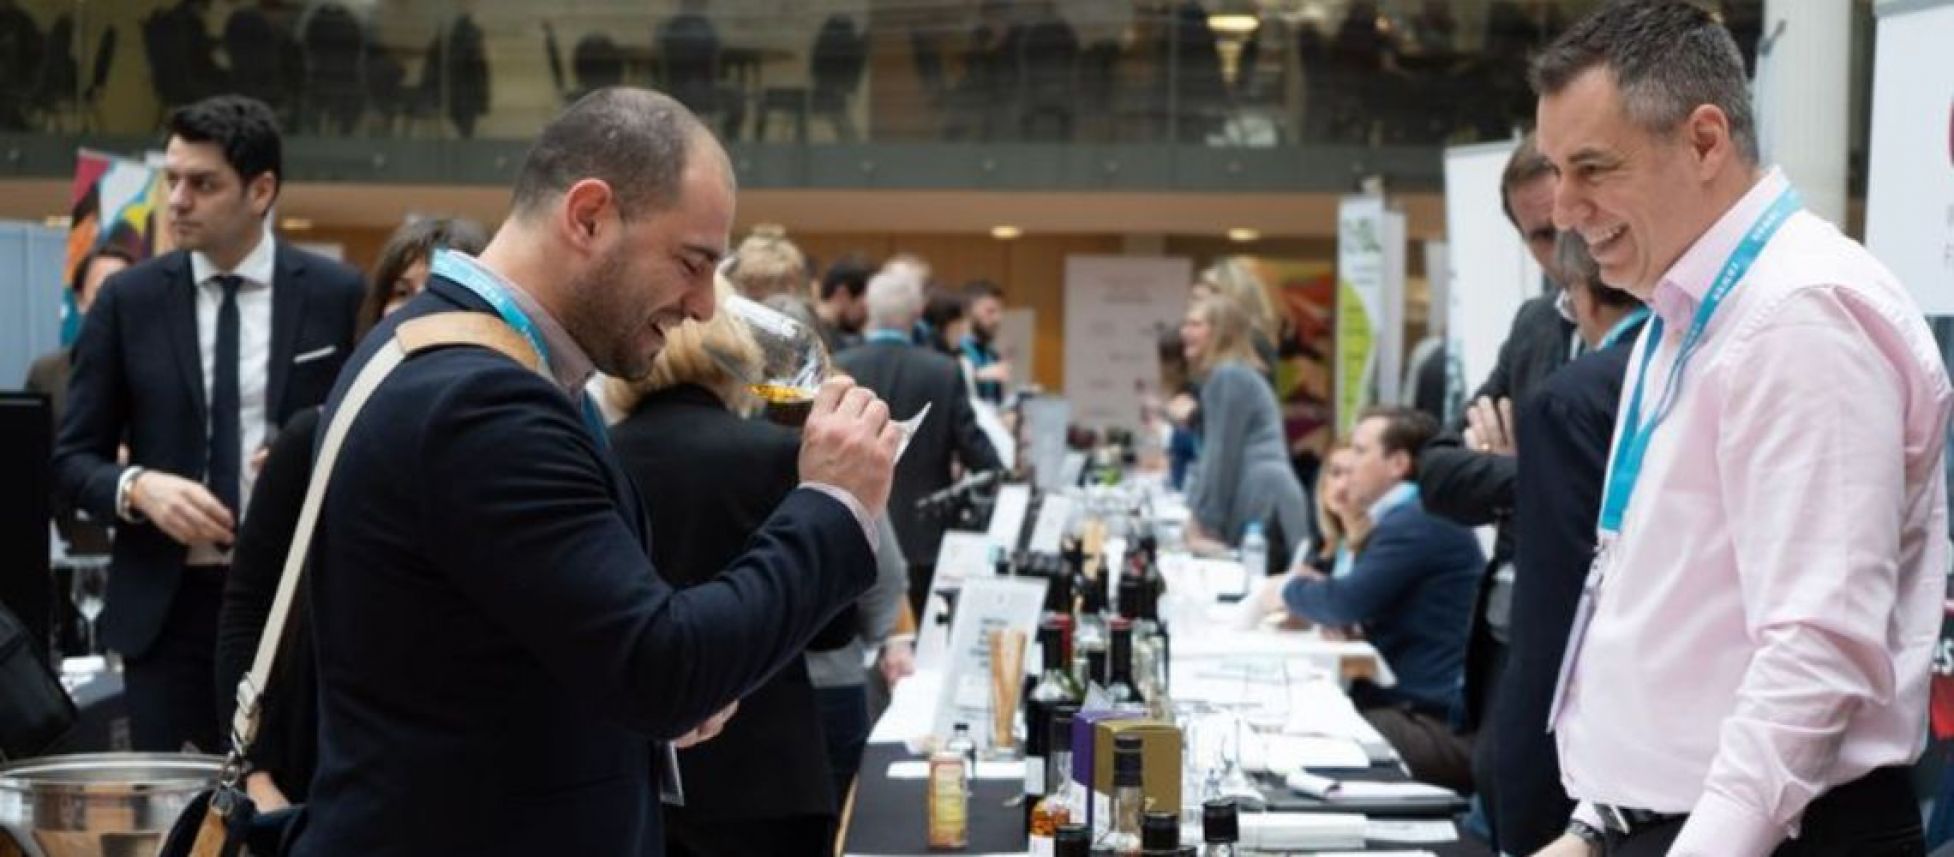 Photo for: 10 reasons for wine and spirits buyers to attend IBWSS UK 2023